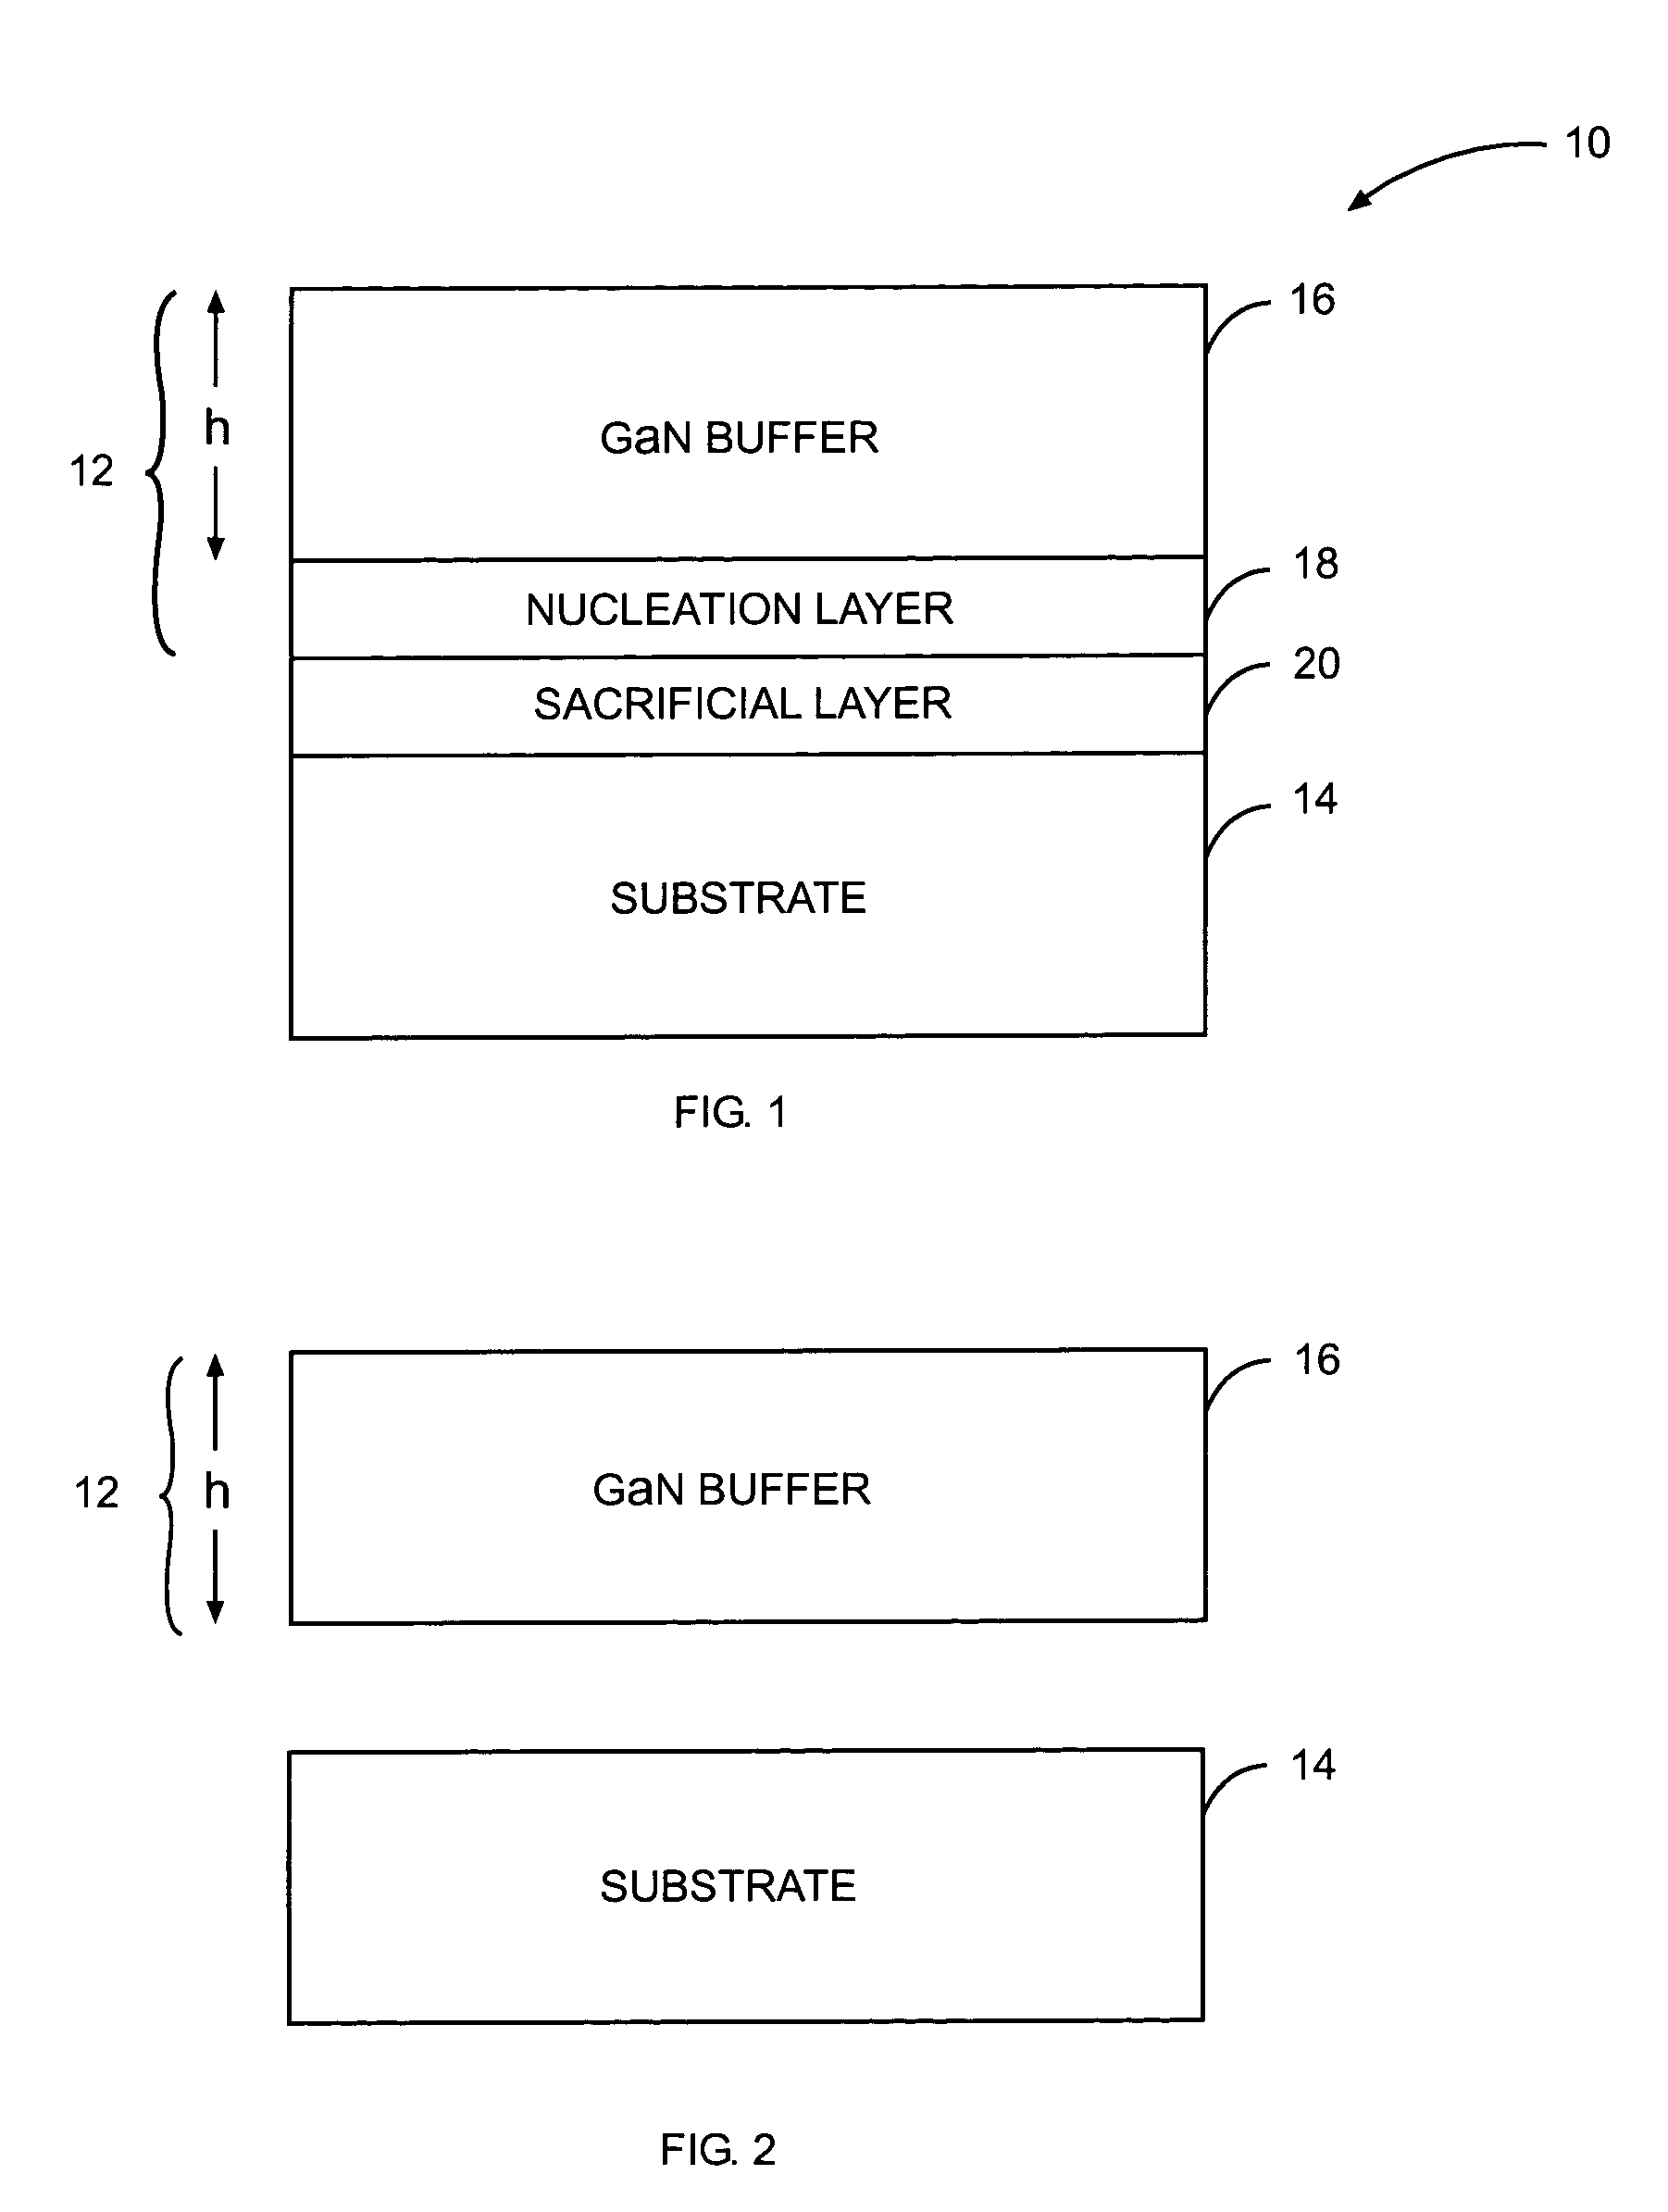 Epitaxy/substrate release layer